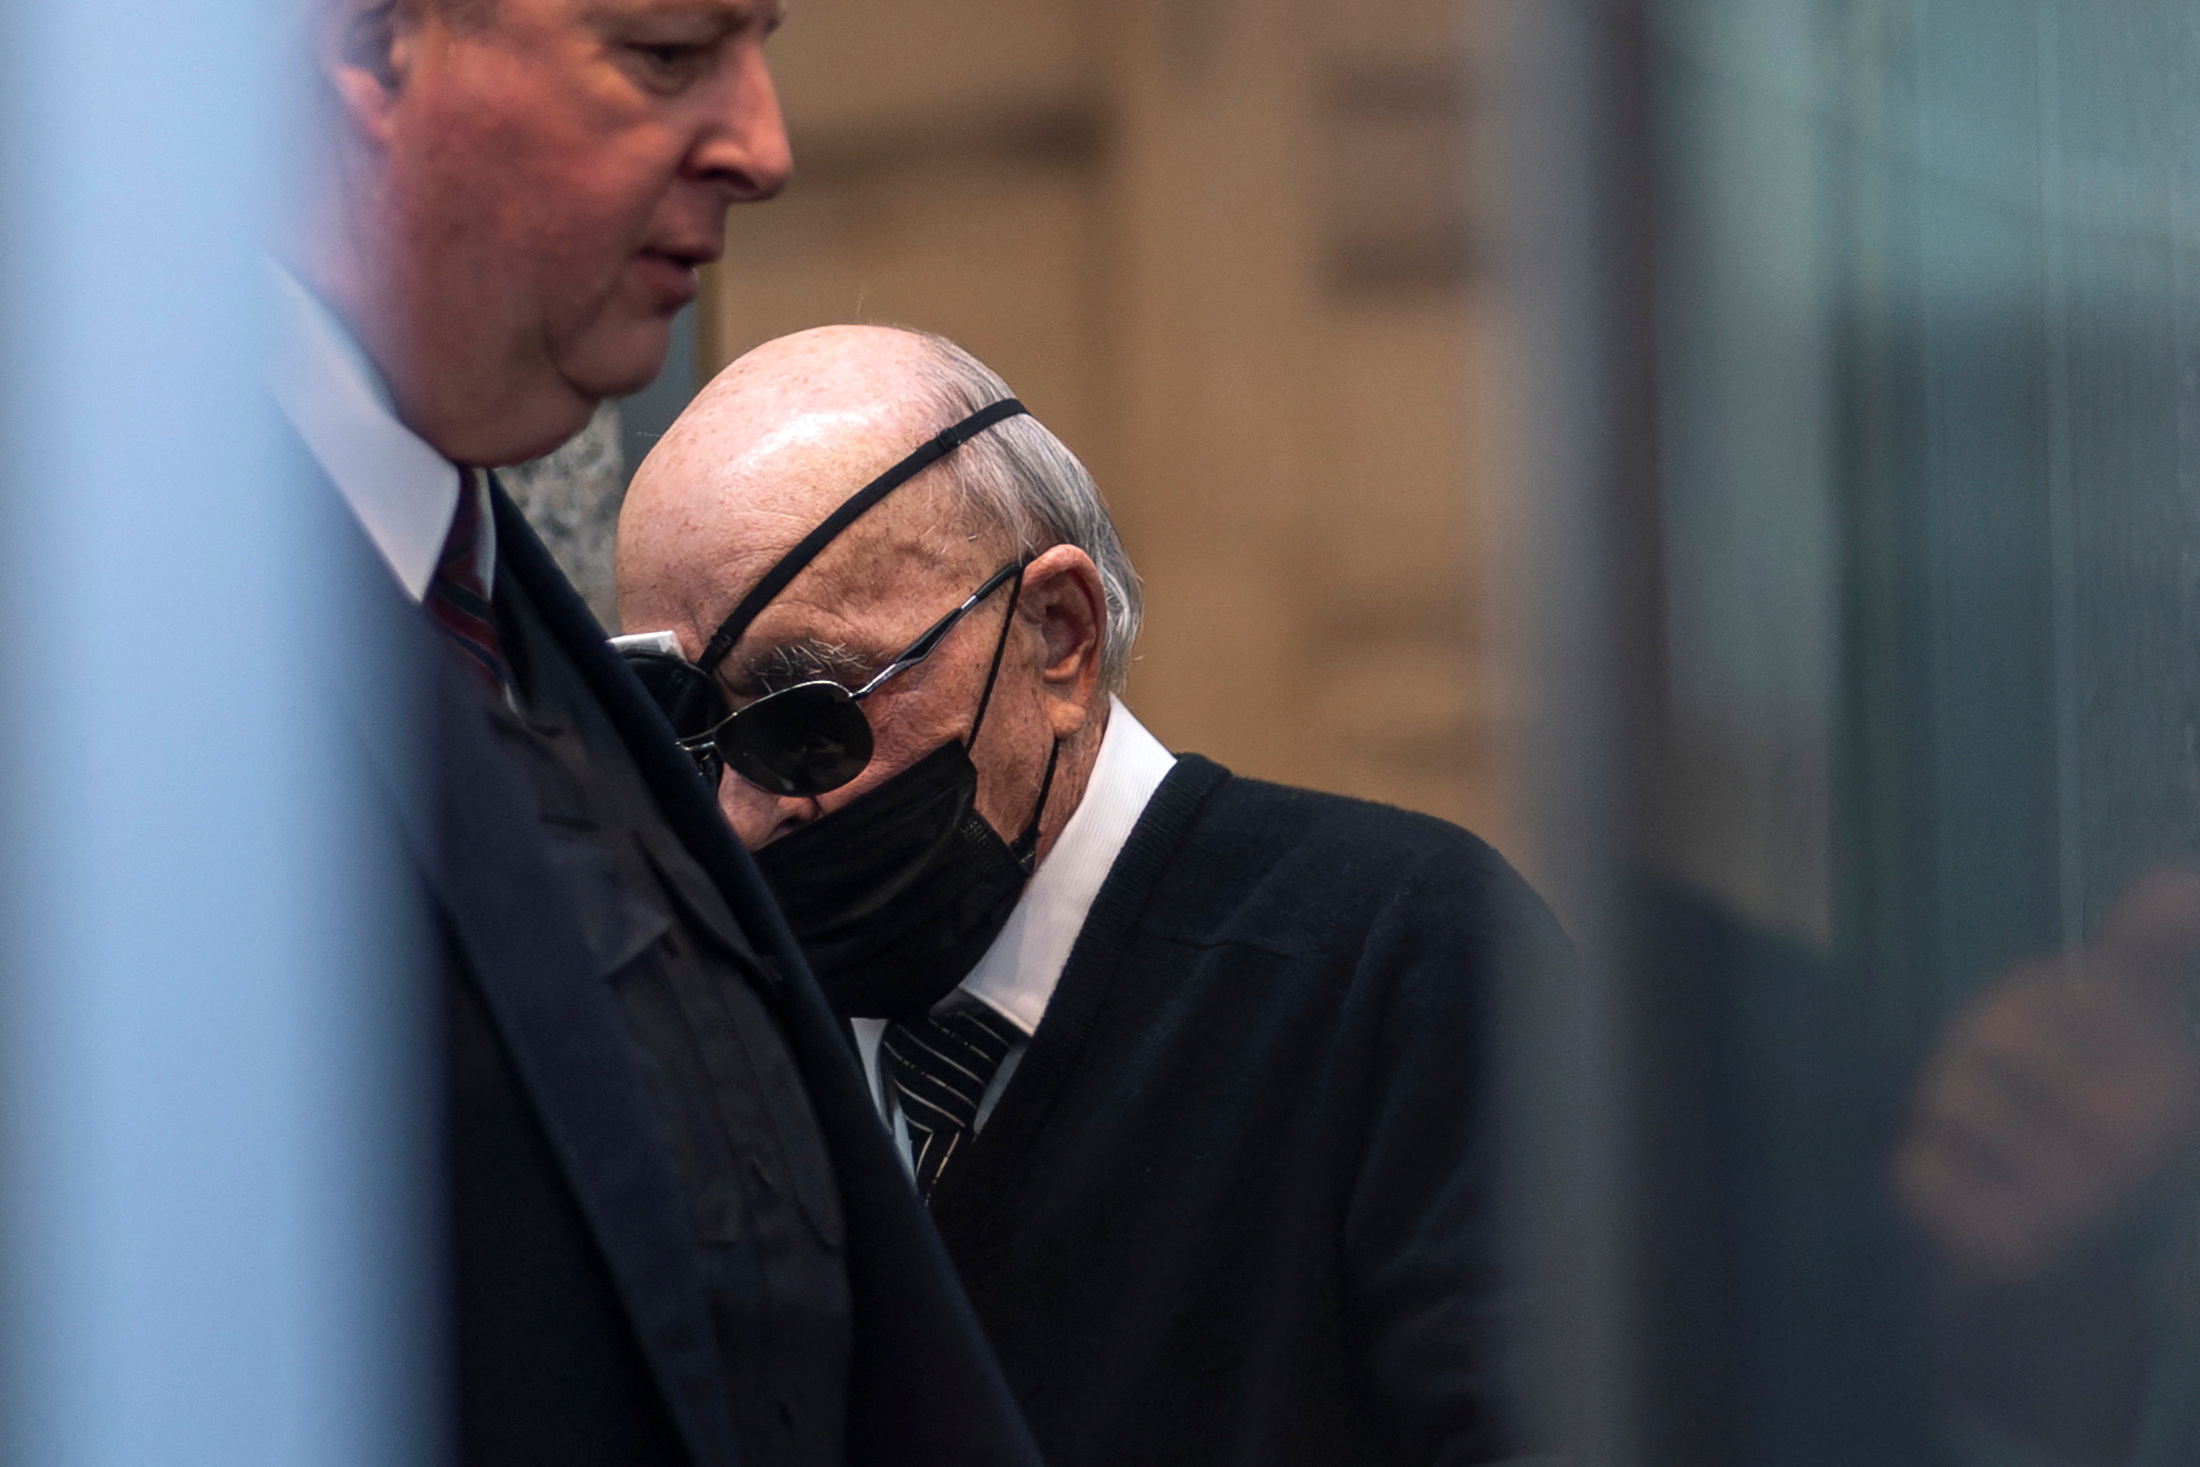 British billionaire Joe Lewis to be sentenced in US court after pleading guilty to insider trading